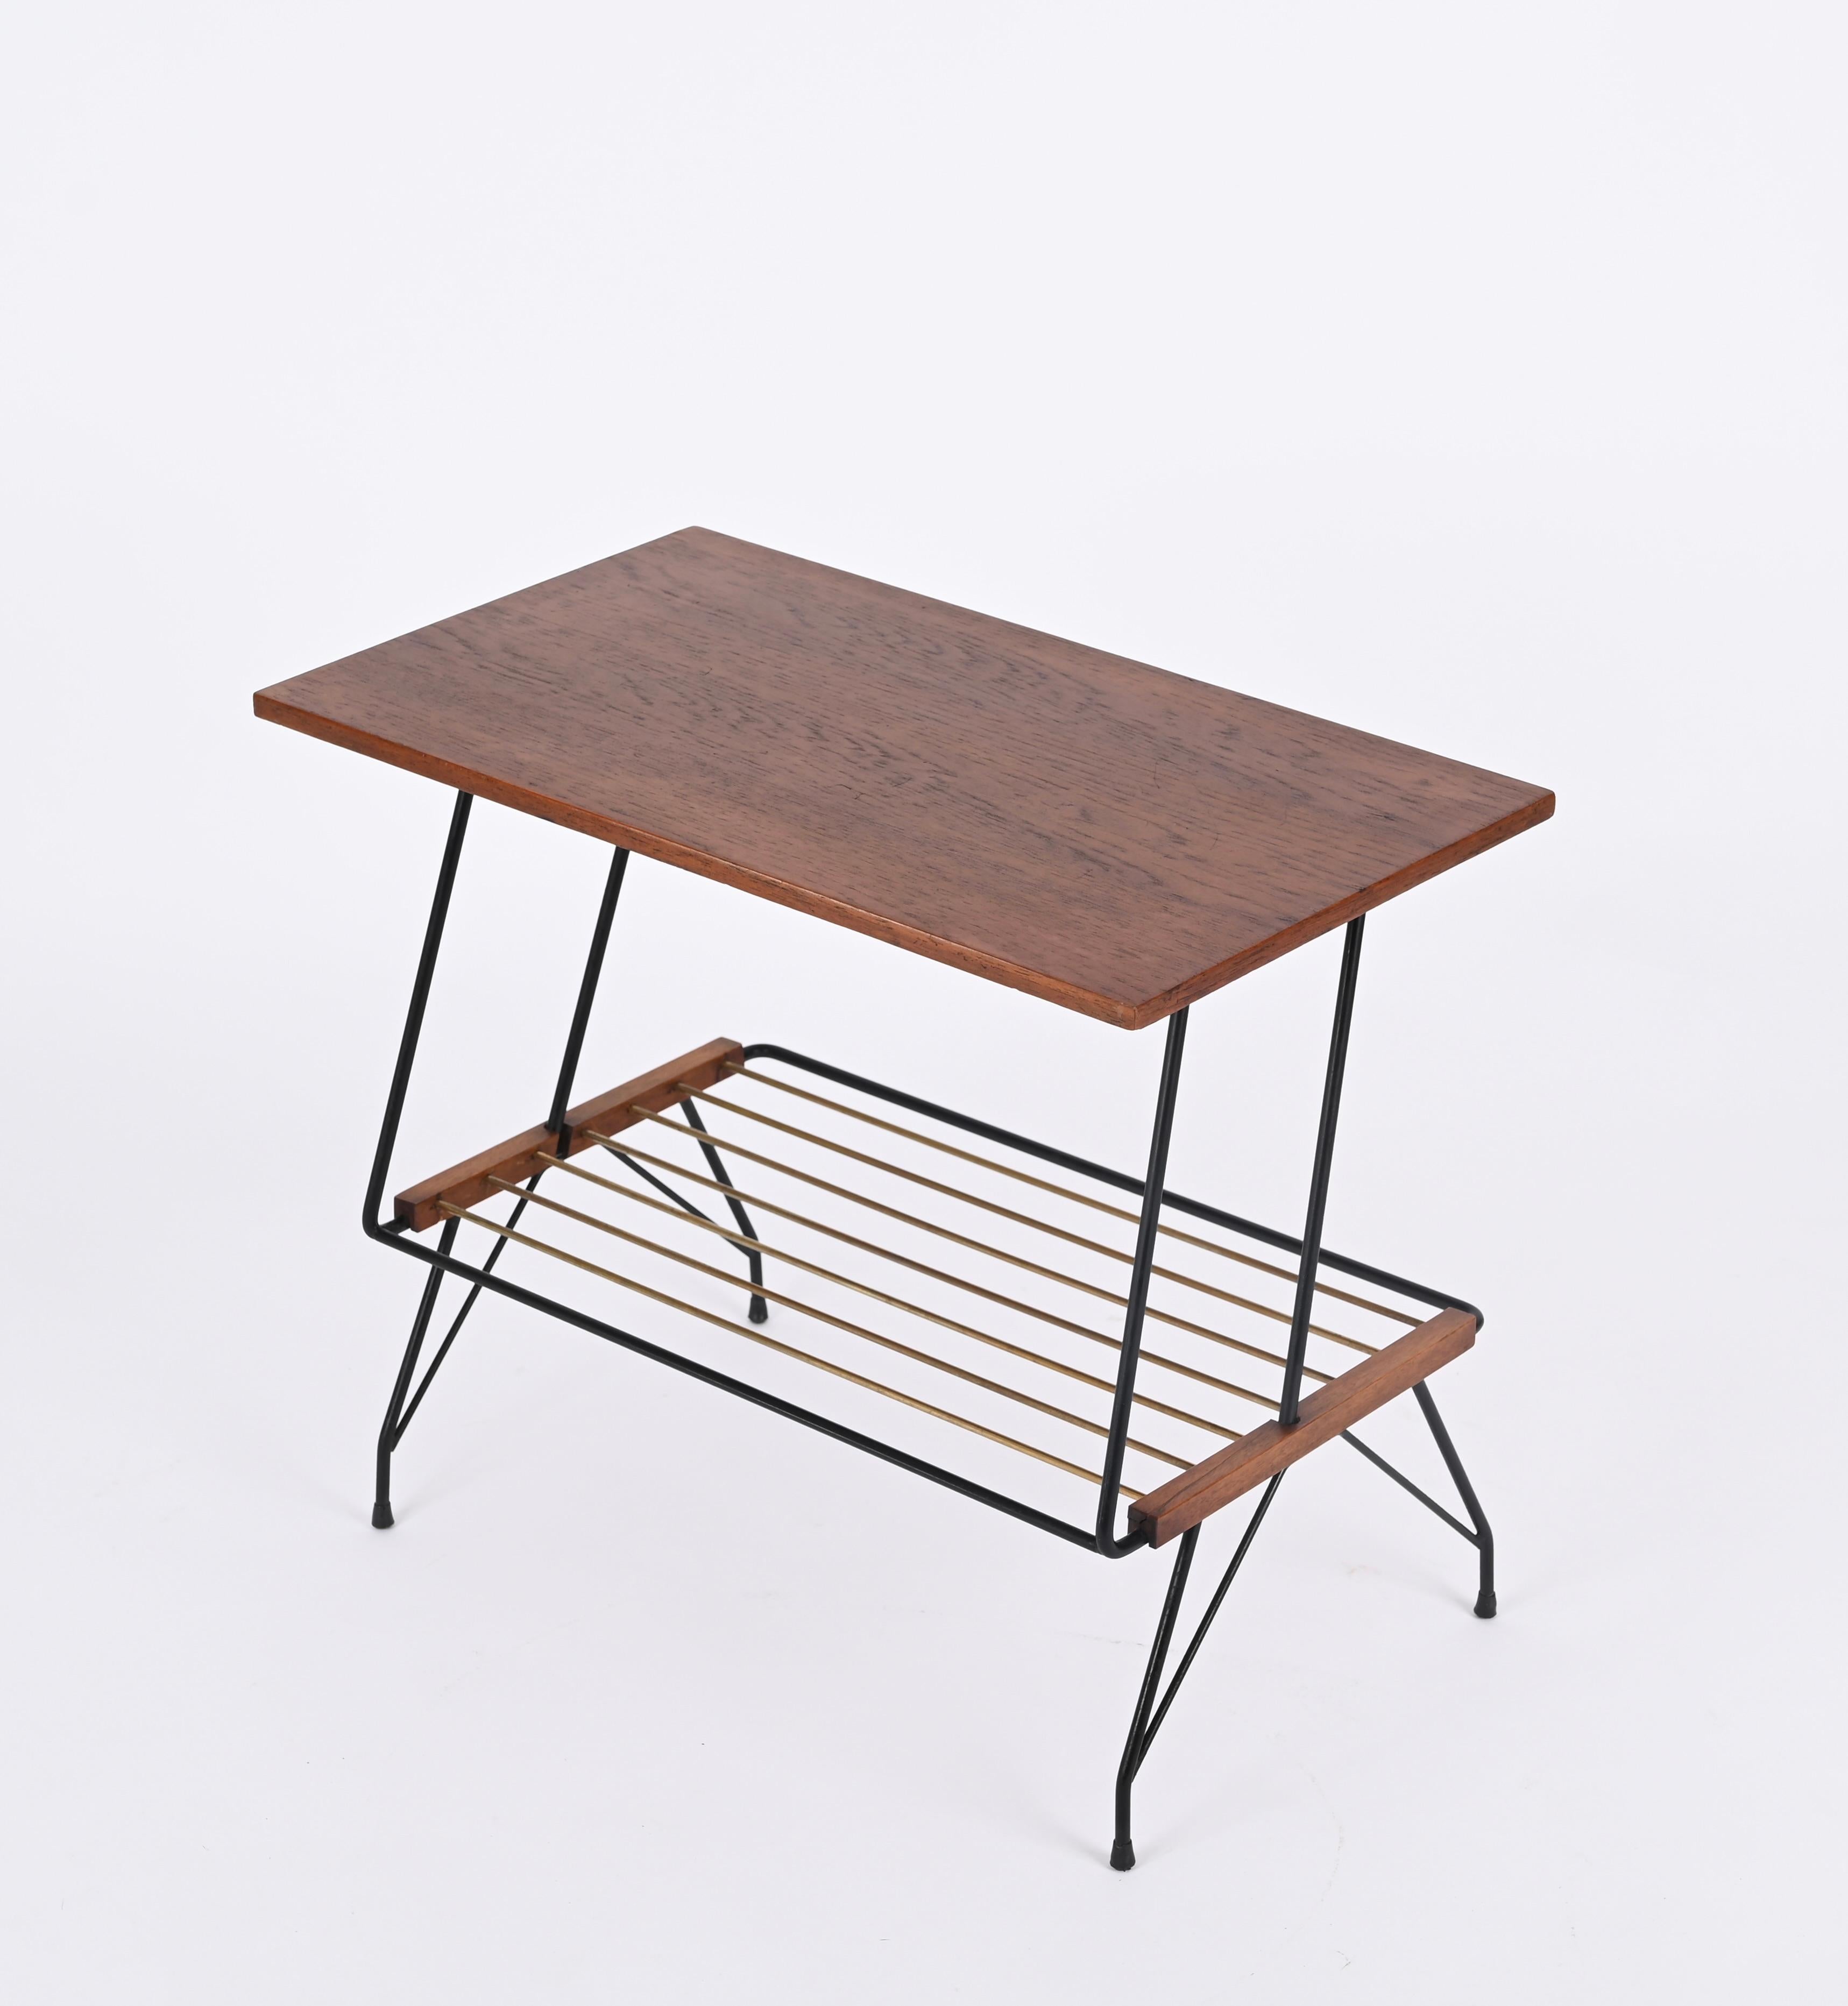 Italian Side or Coffee Table with Brass Magazine Rack by Mobili Pizzetti, 1950s For Sale 8